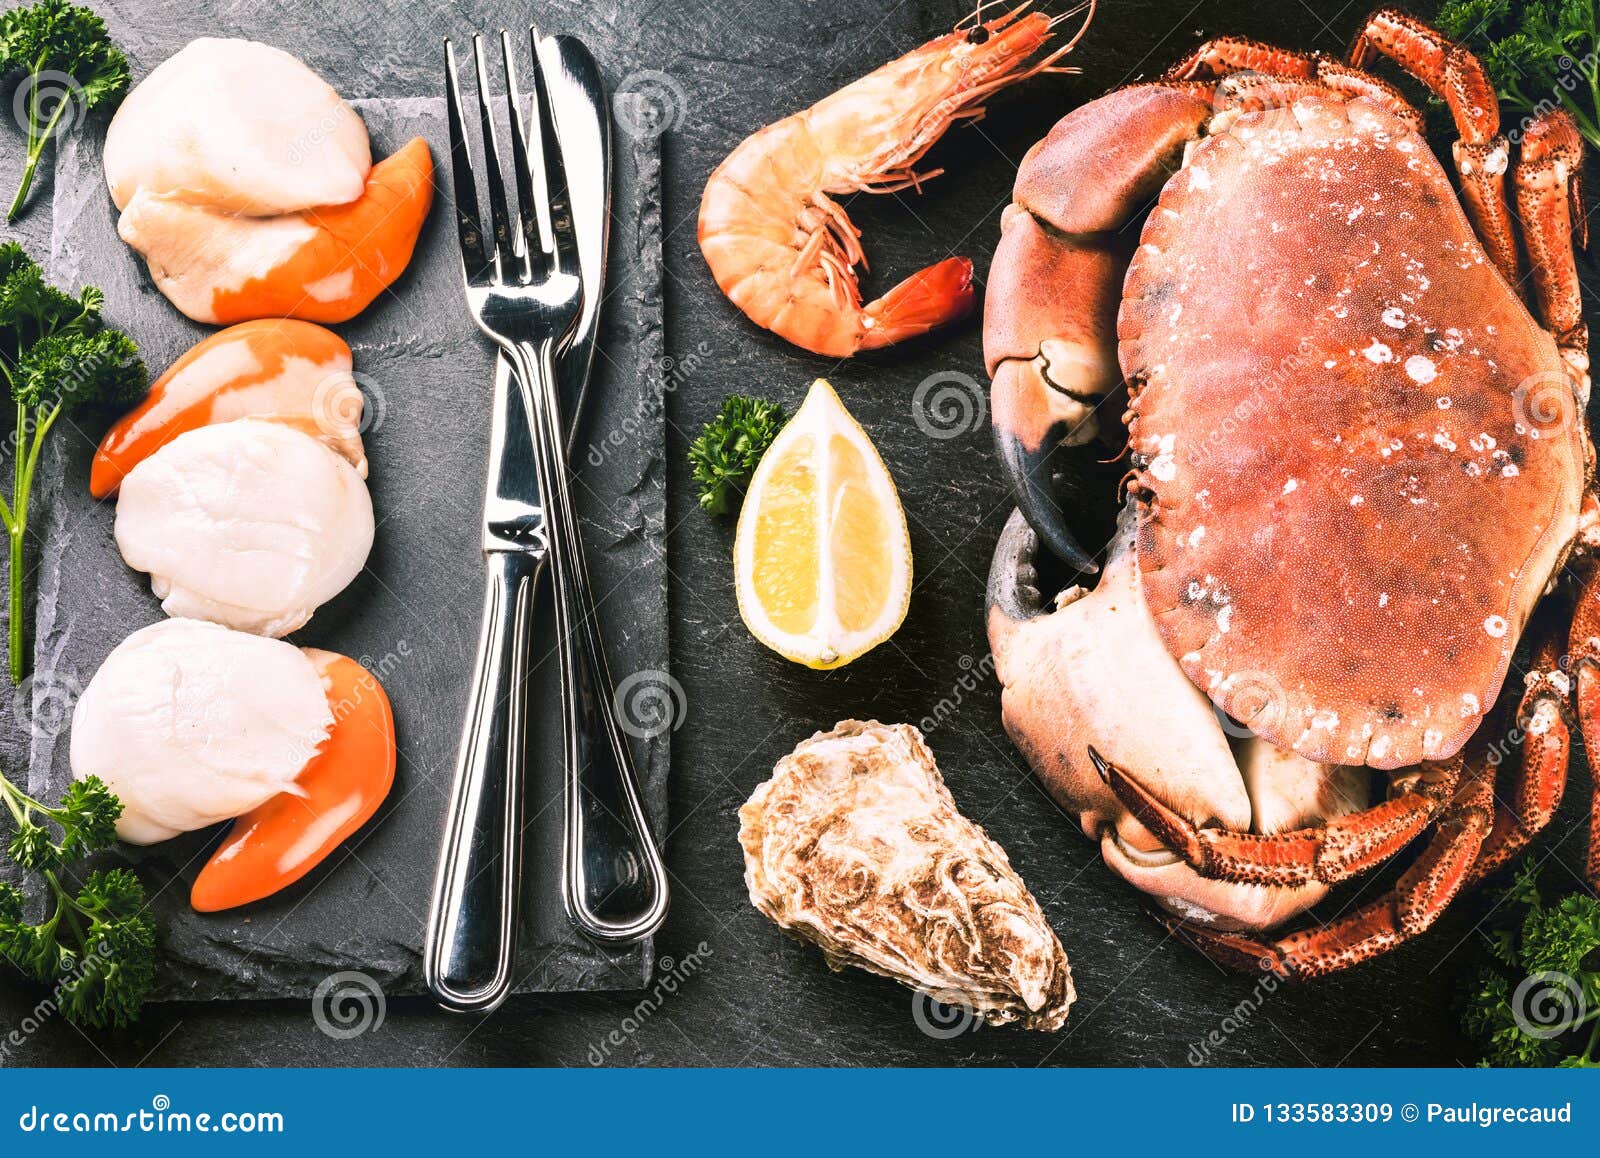 fine selection of crustacean for dinner. crab, scallops and oyst